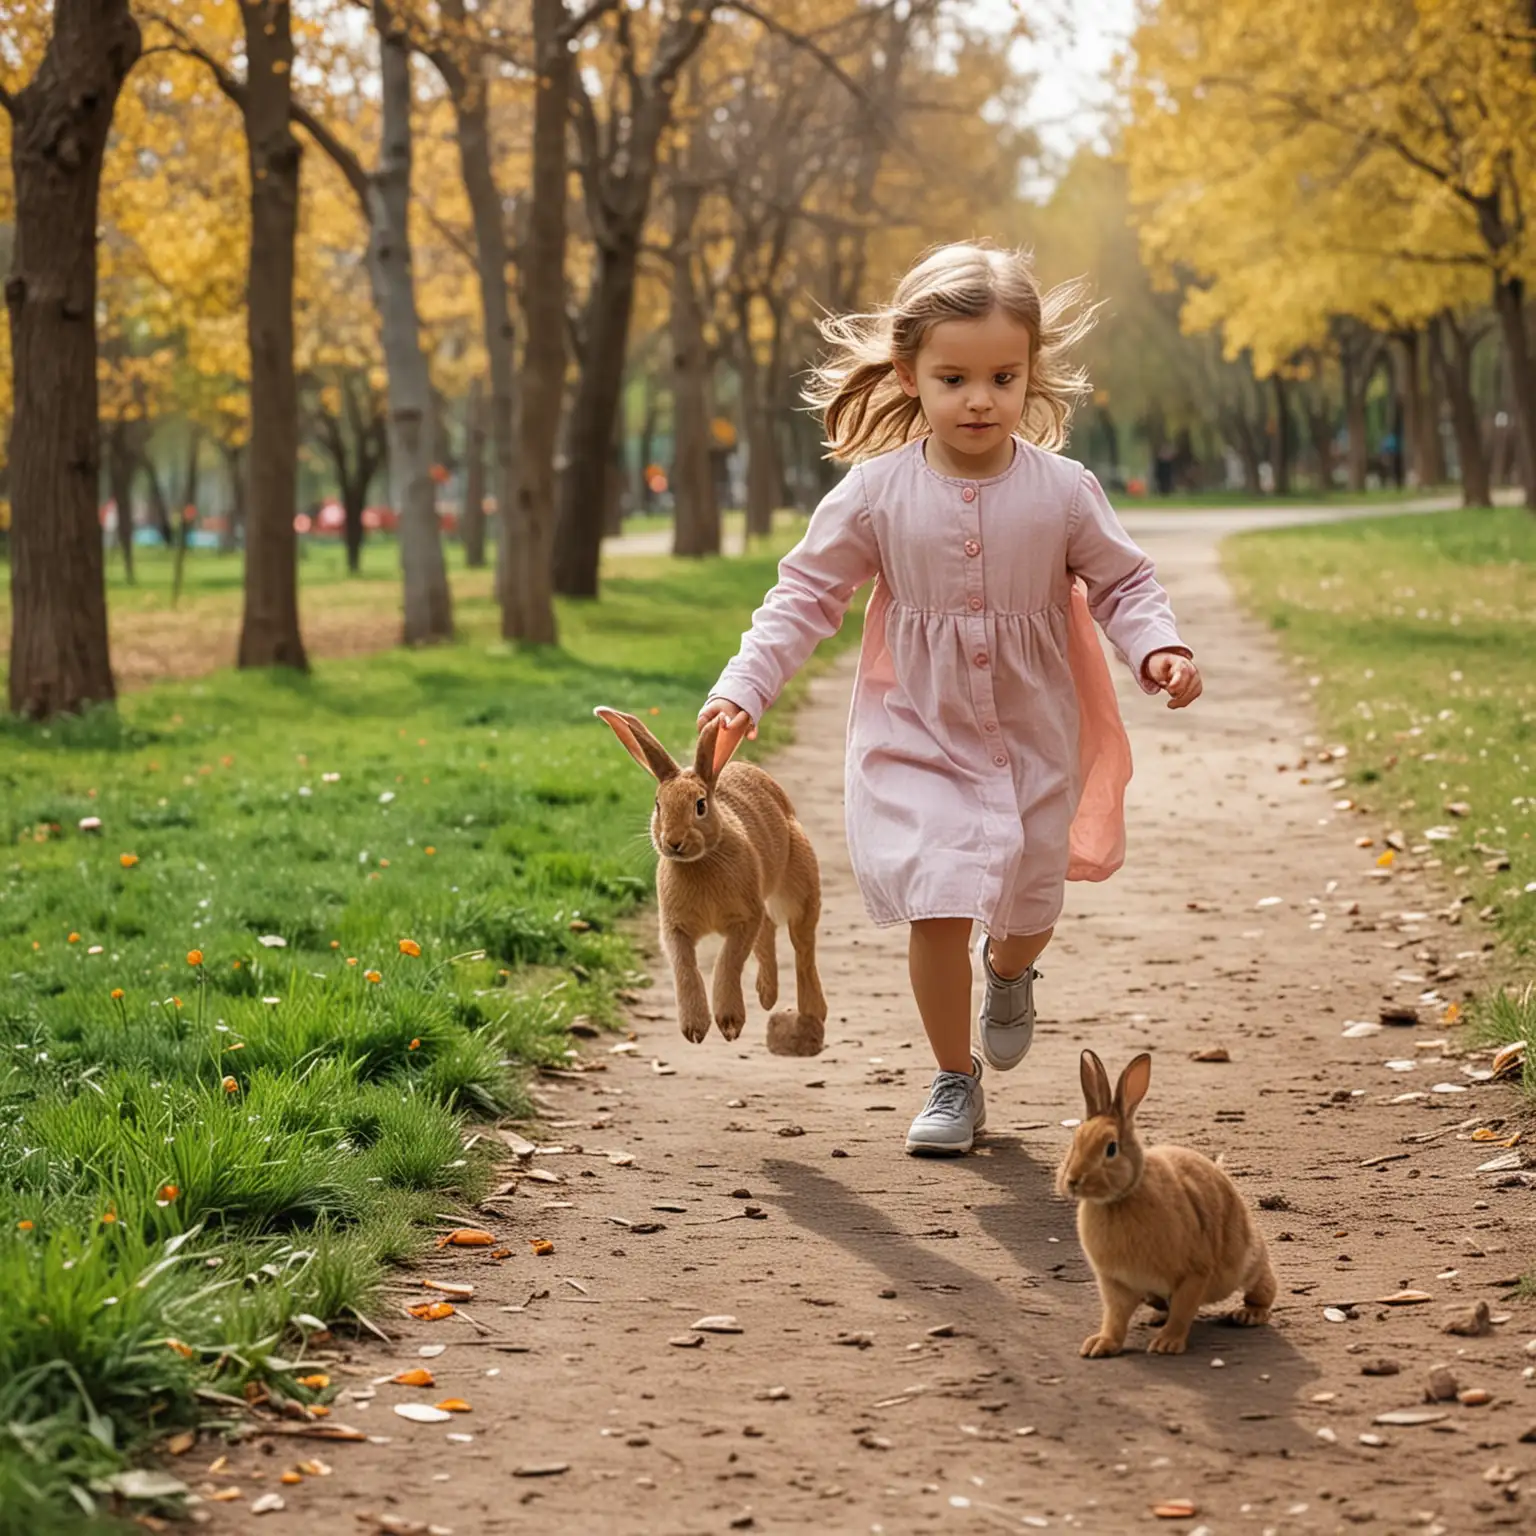 A small girl running in the park, A brown rabbit sitting near the small girl